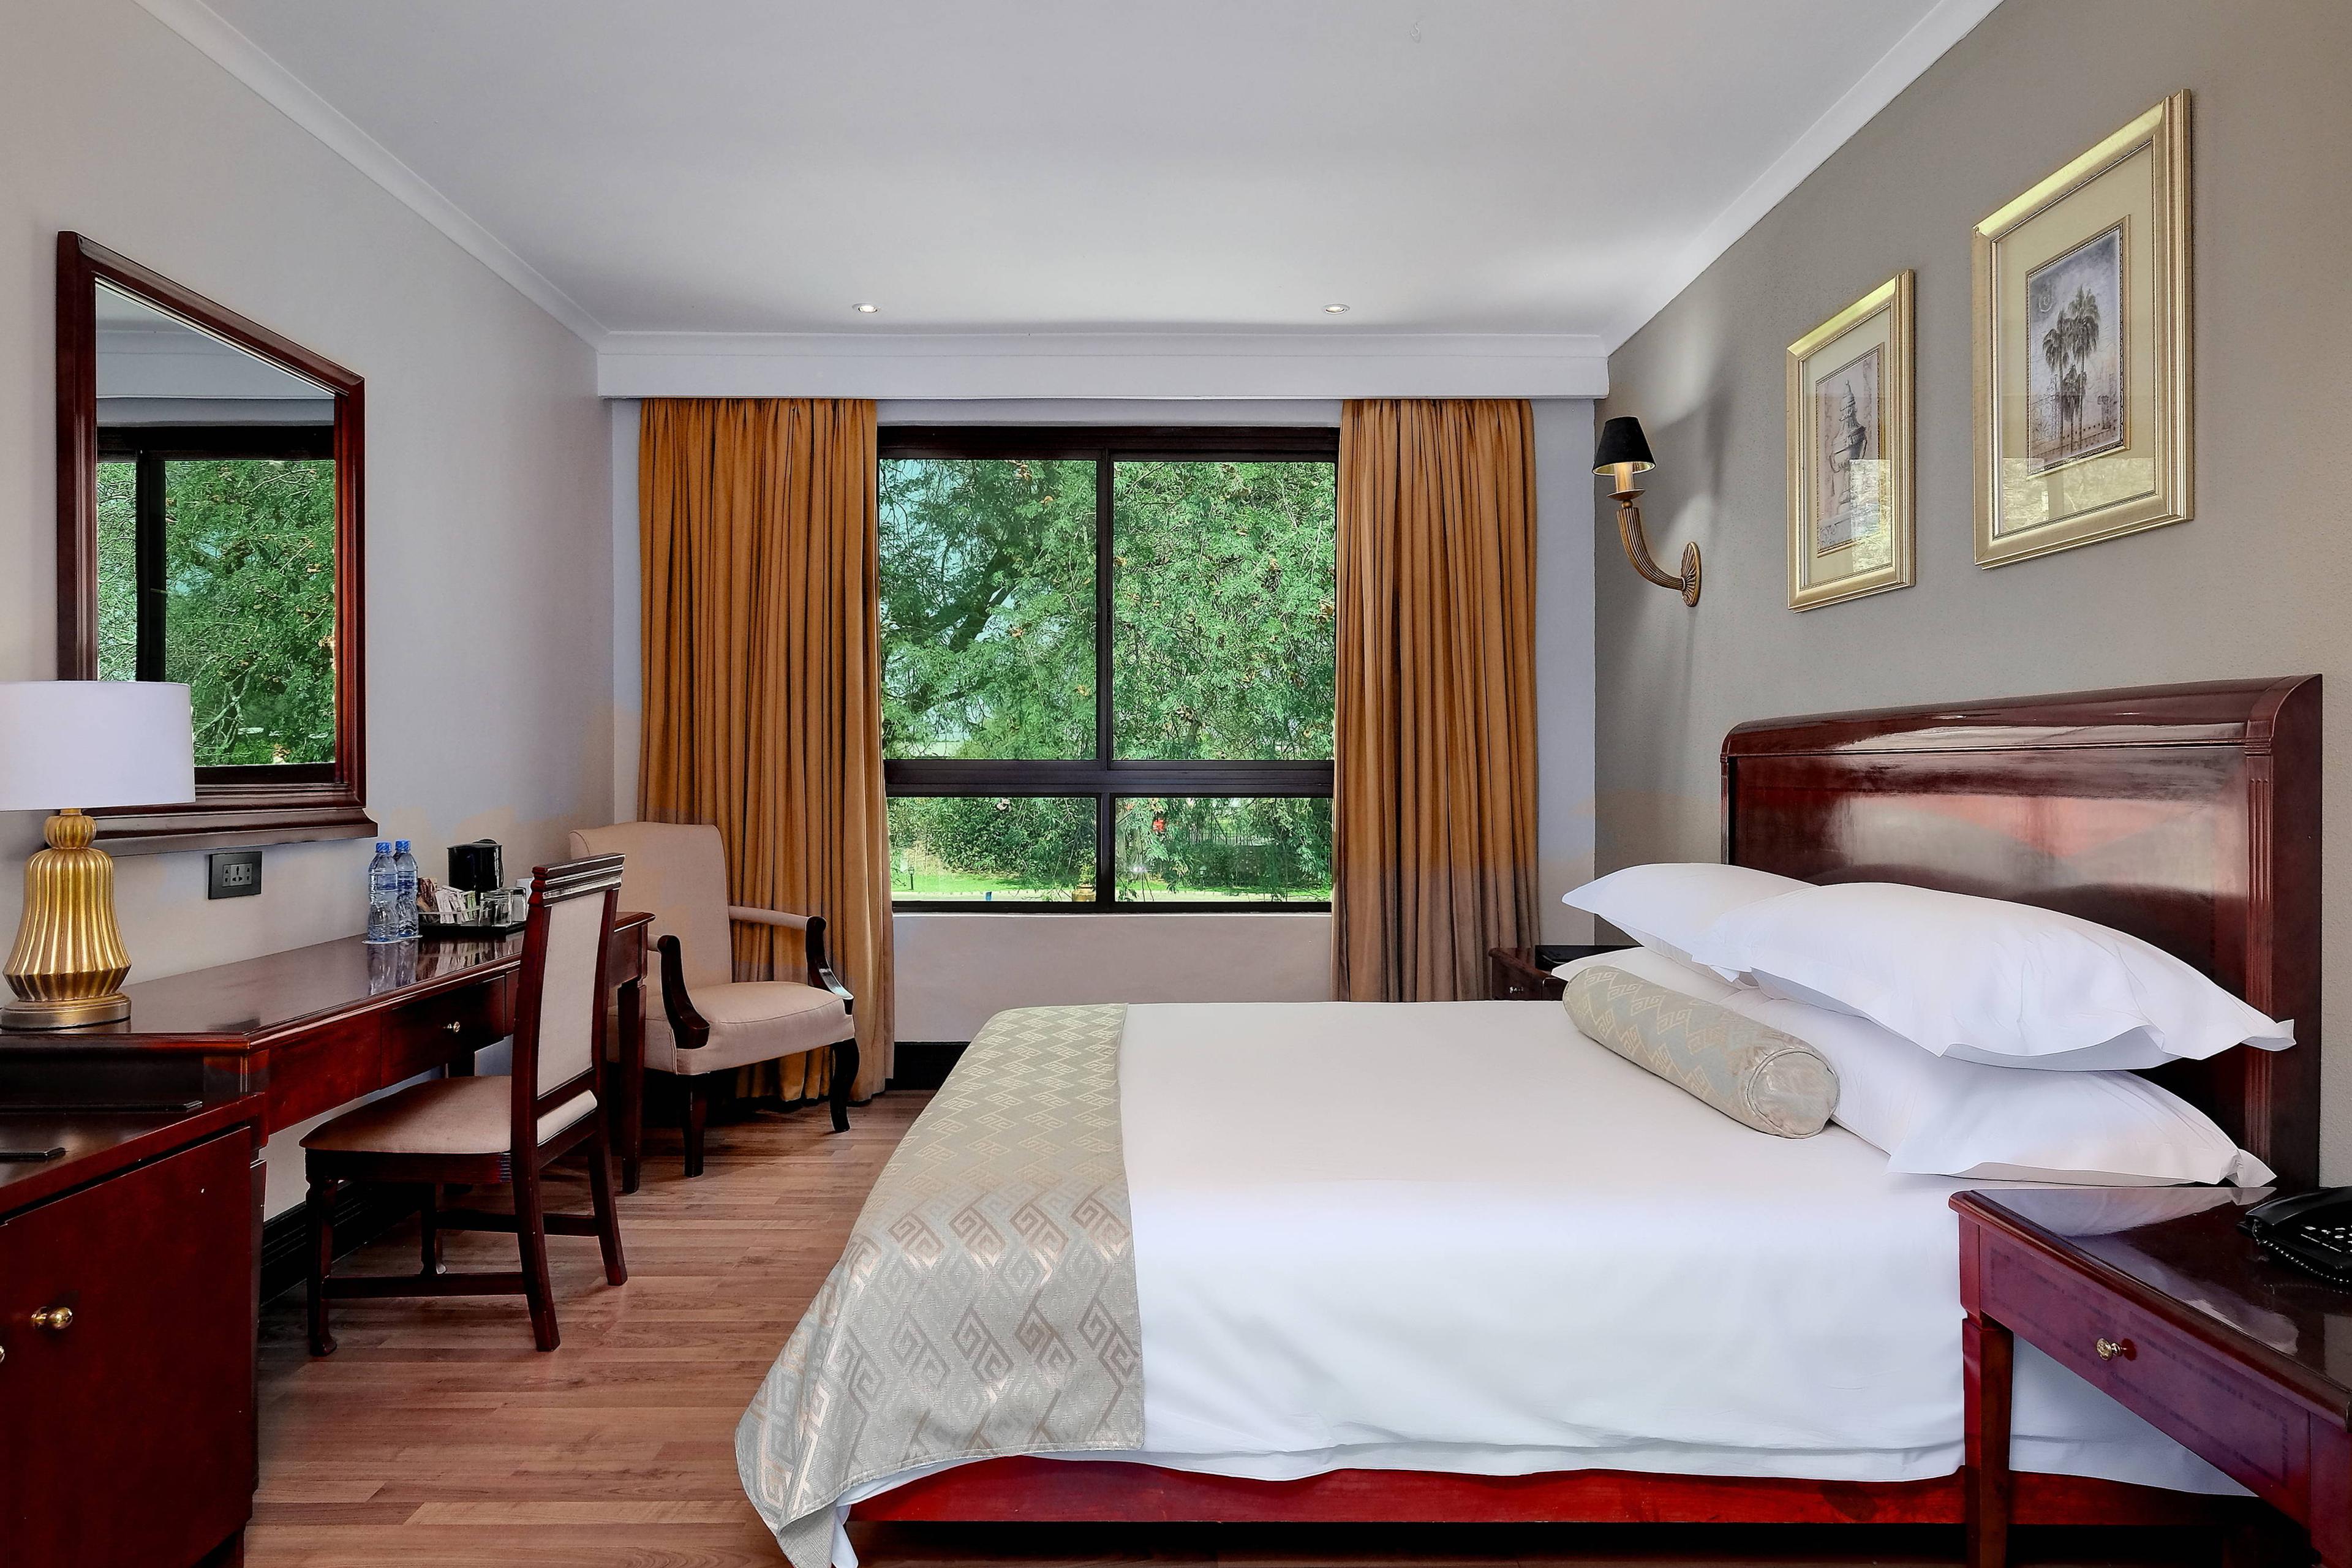 Wake up refreshed and ready to start the day in Livingstone in our deluxe king guest room with a stunning view of the lush property.